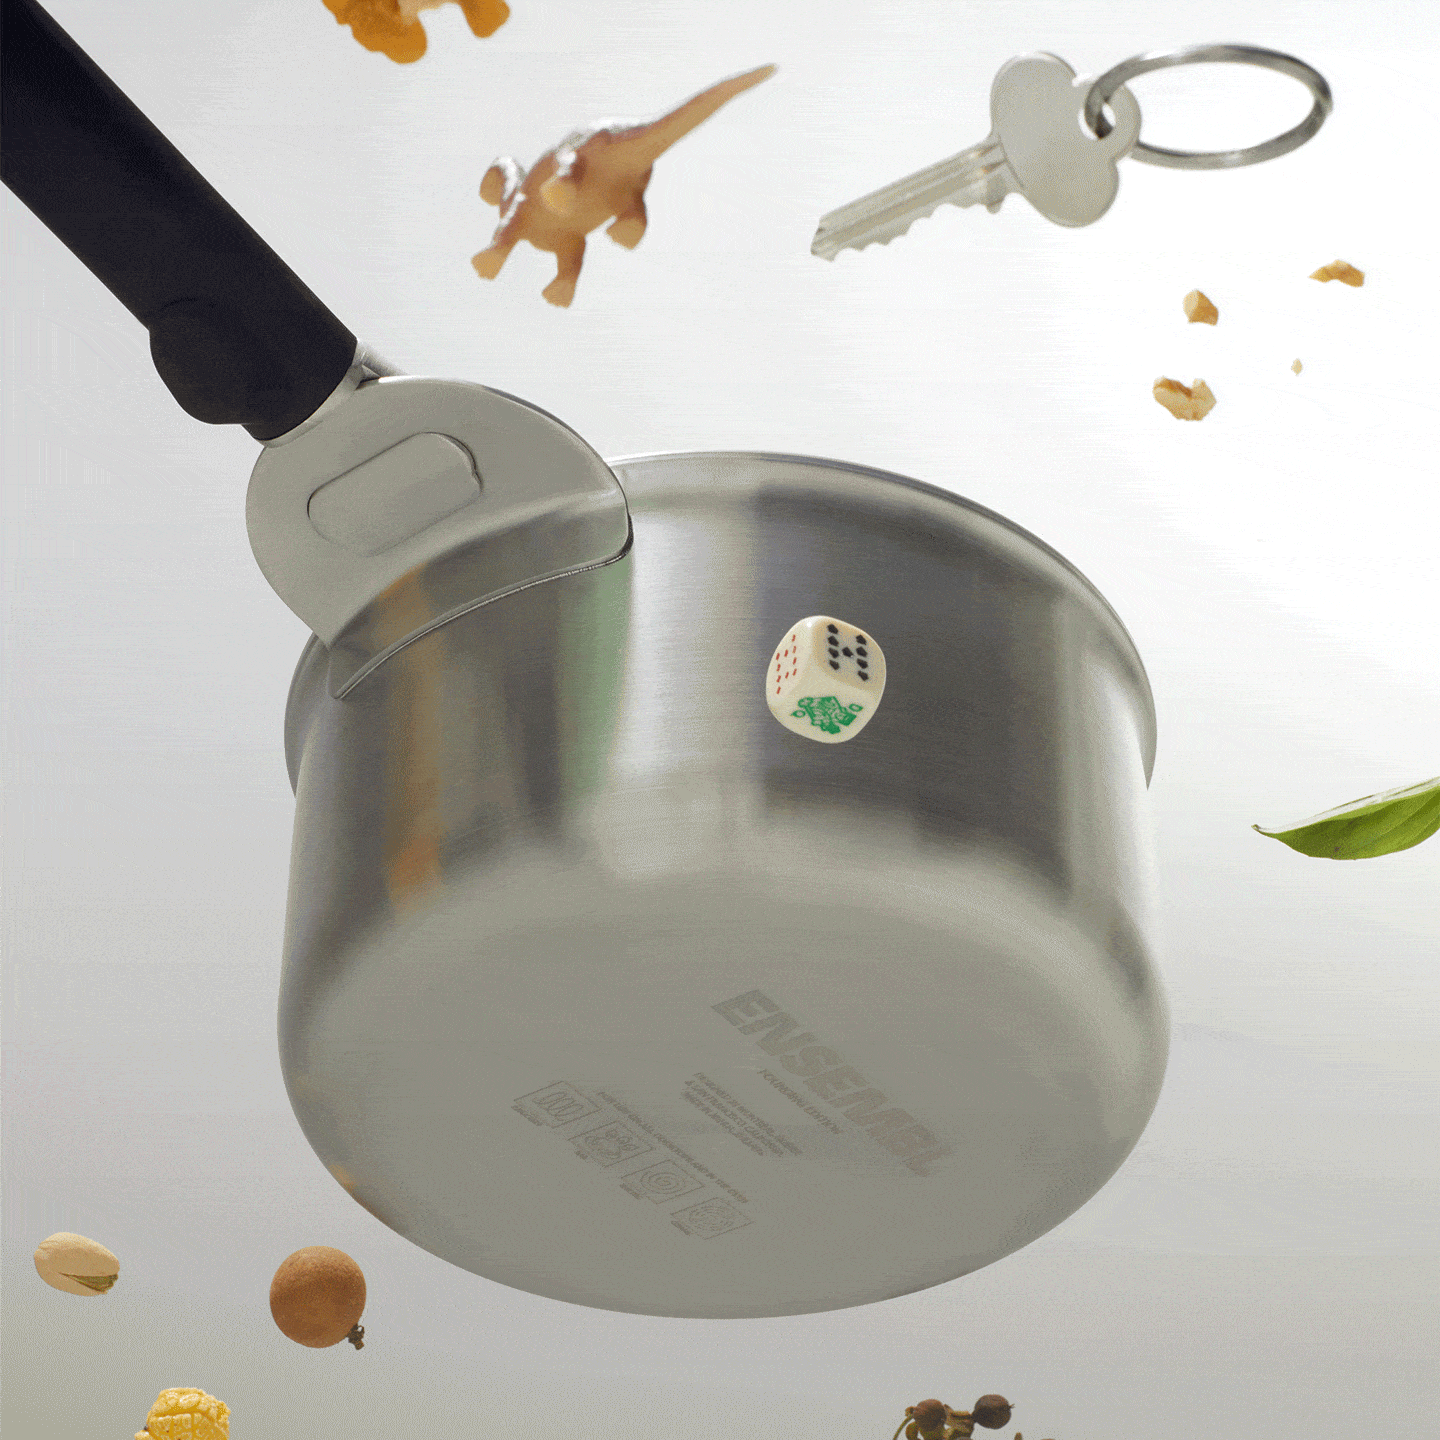 ENSEMBL Stackware Removable Handle on stainless steel cookware